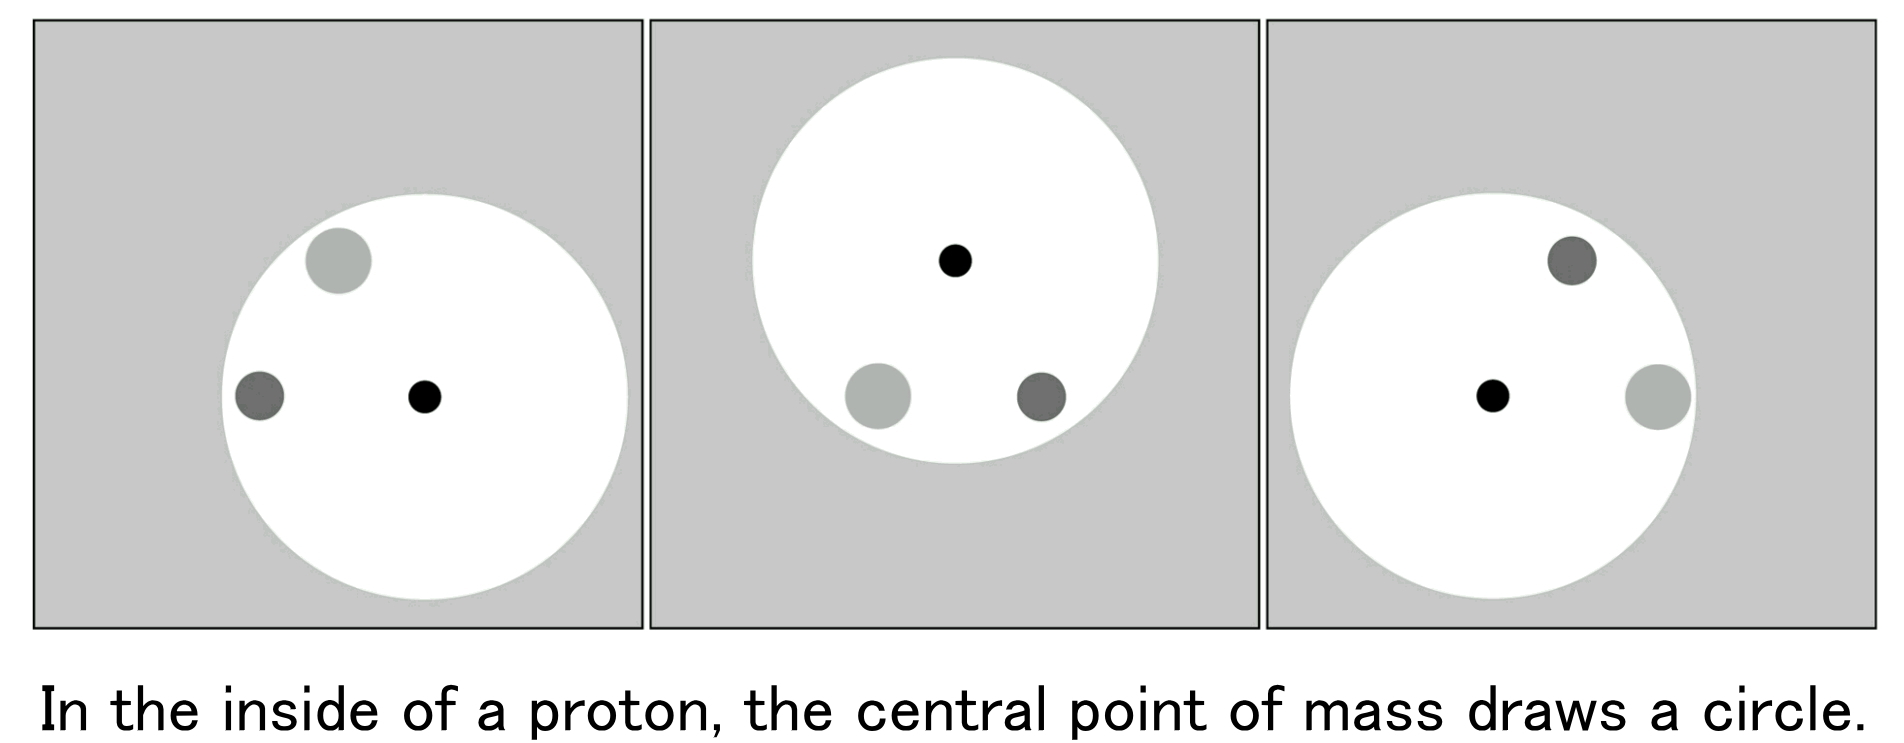 In the inside of a proton, the central point of mass draws a circle.